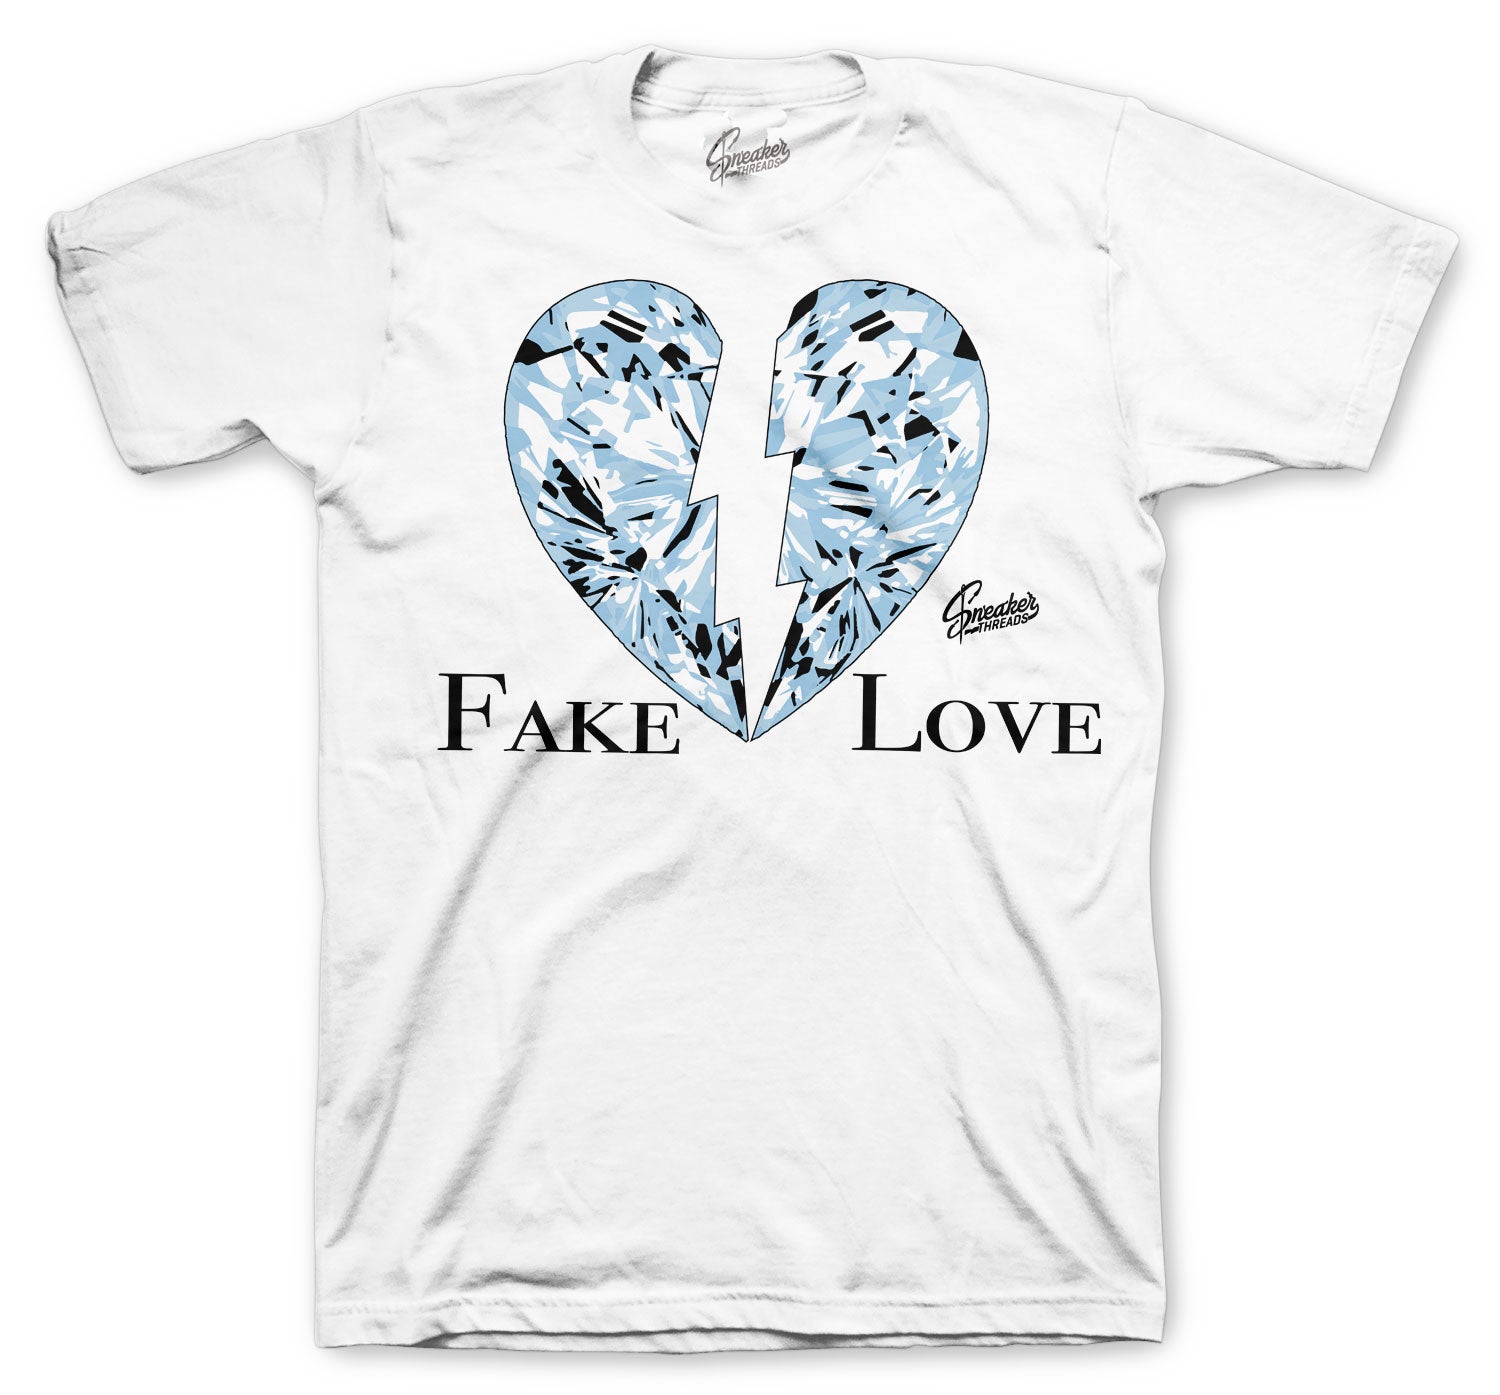 Yeezy 350 blue Sneaker shirts and matching | Tees Match